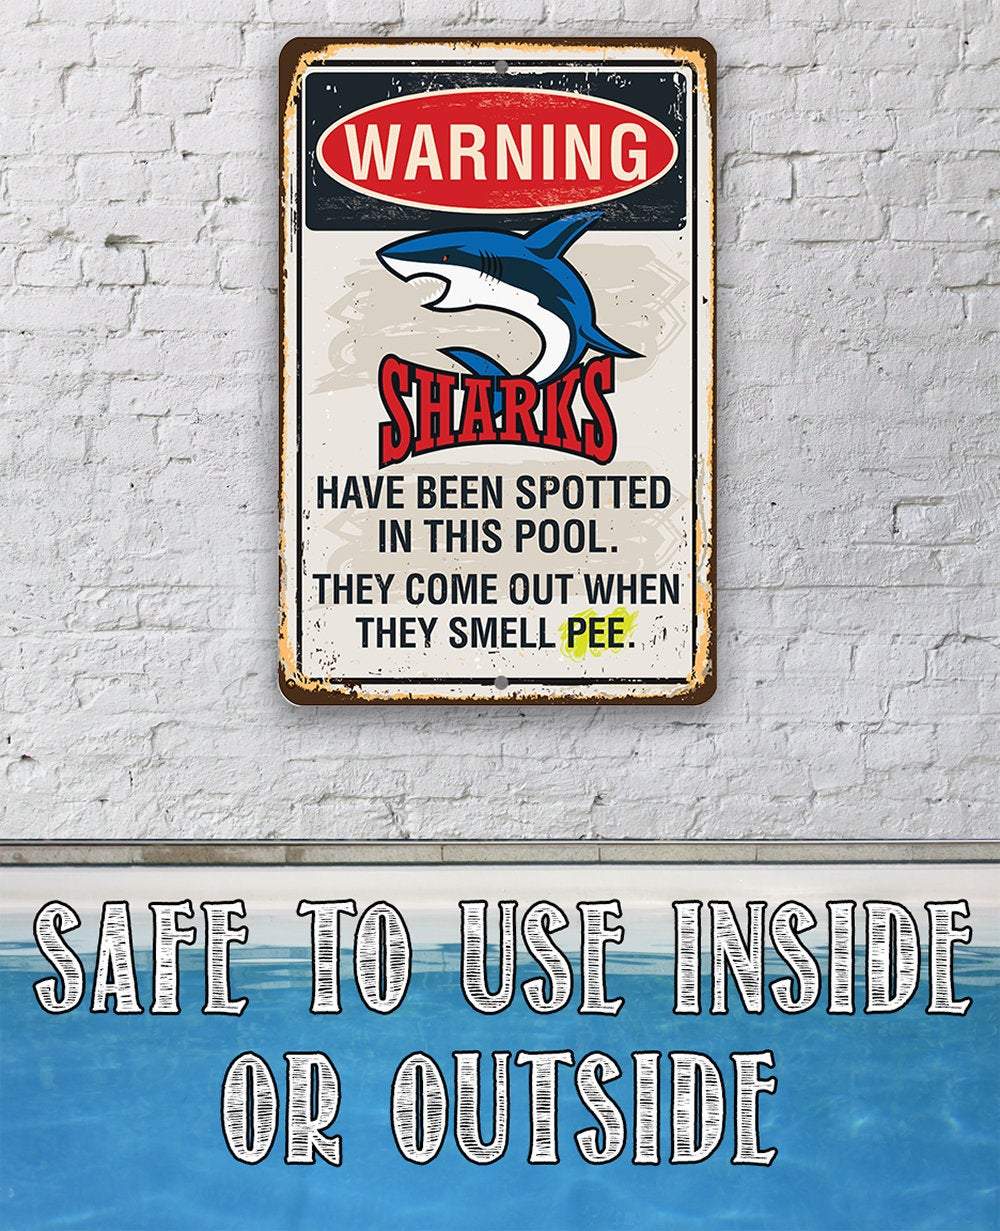 Warning Sharks Have Been Spotted In This Pool - Metal Sign | Lone Star Art.